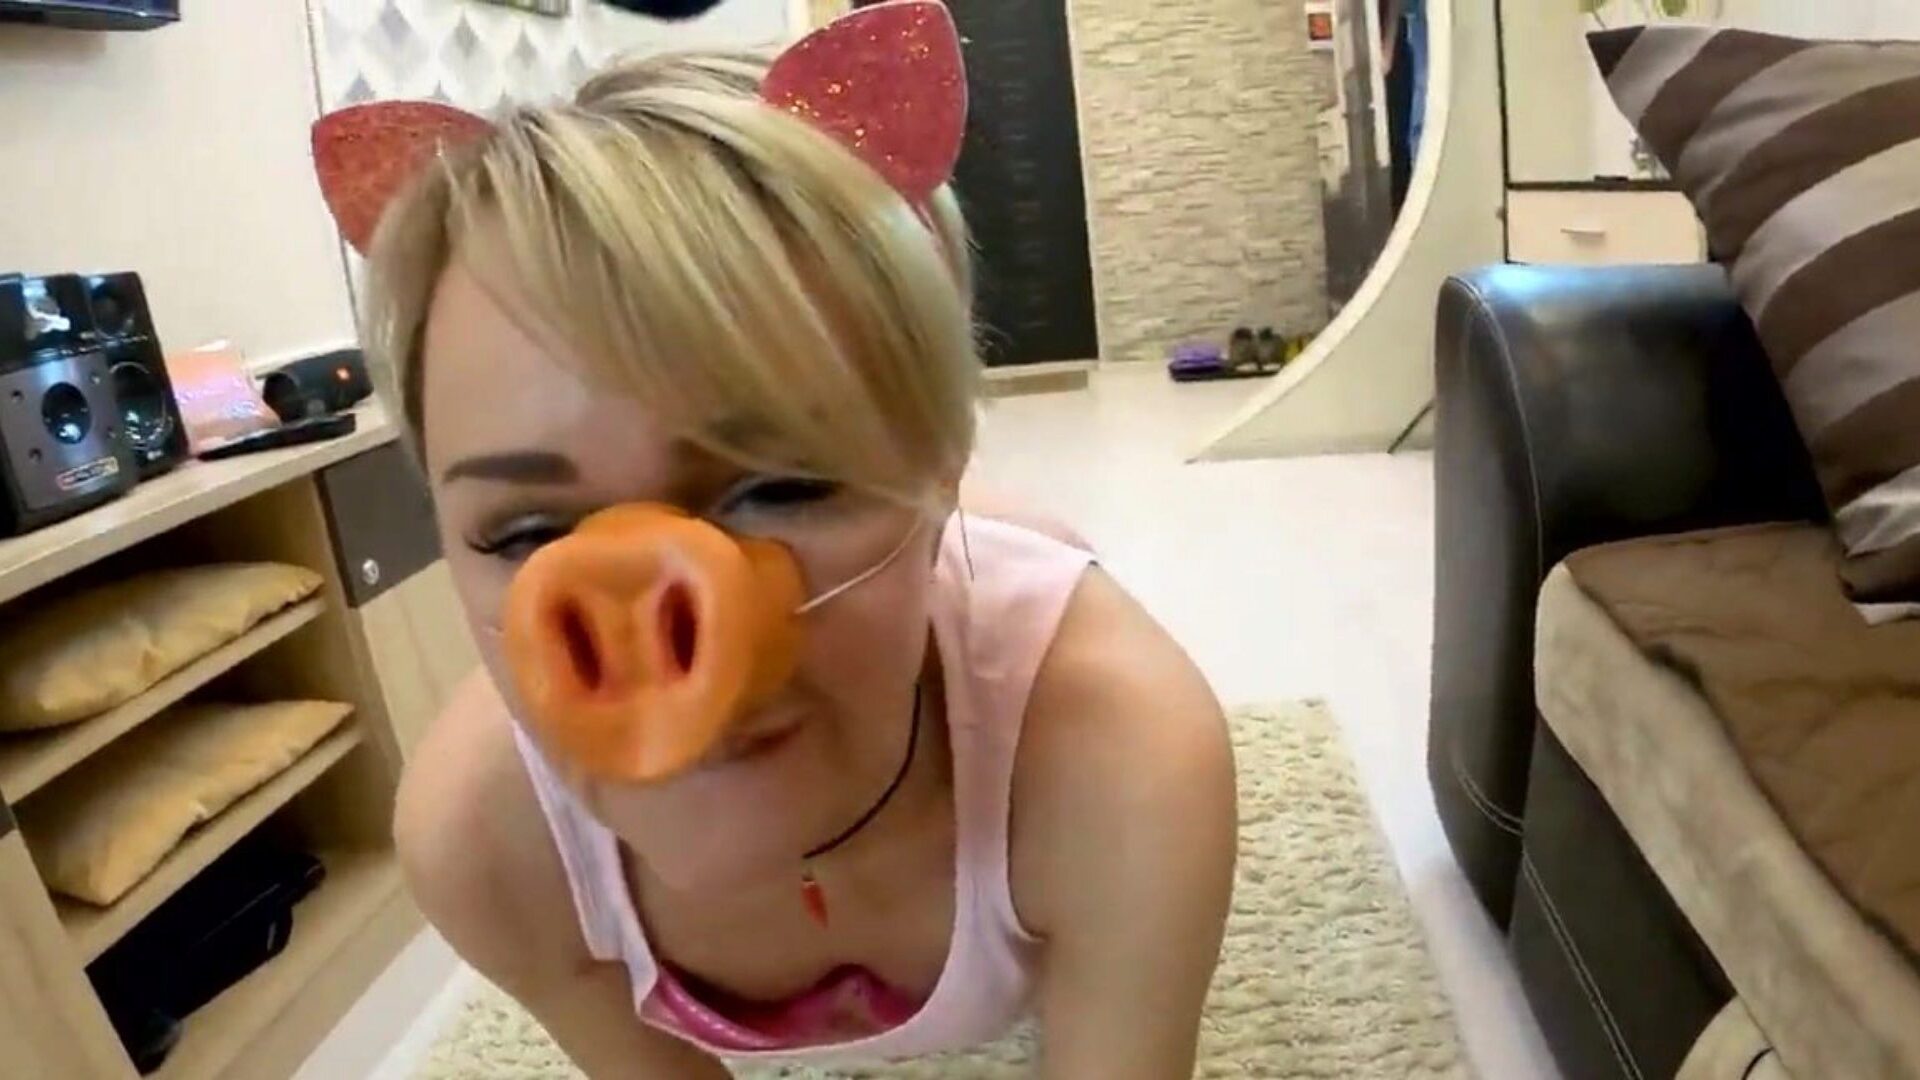 piggie deep sucking big dick & ass fucking - facial ... sledovat piggie deep sucking big dick & ass fucking - facial cumshot video on xhamster - the ultimate bevy of free mother I'd like to fuck & hardcore hd porno clips